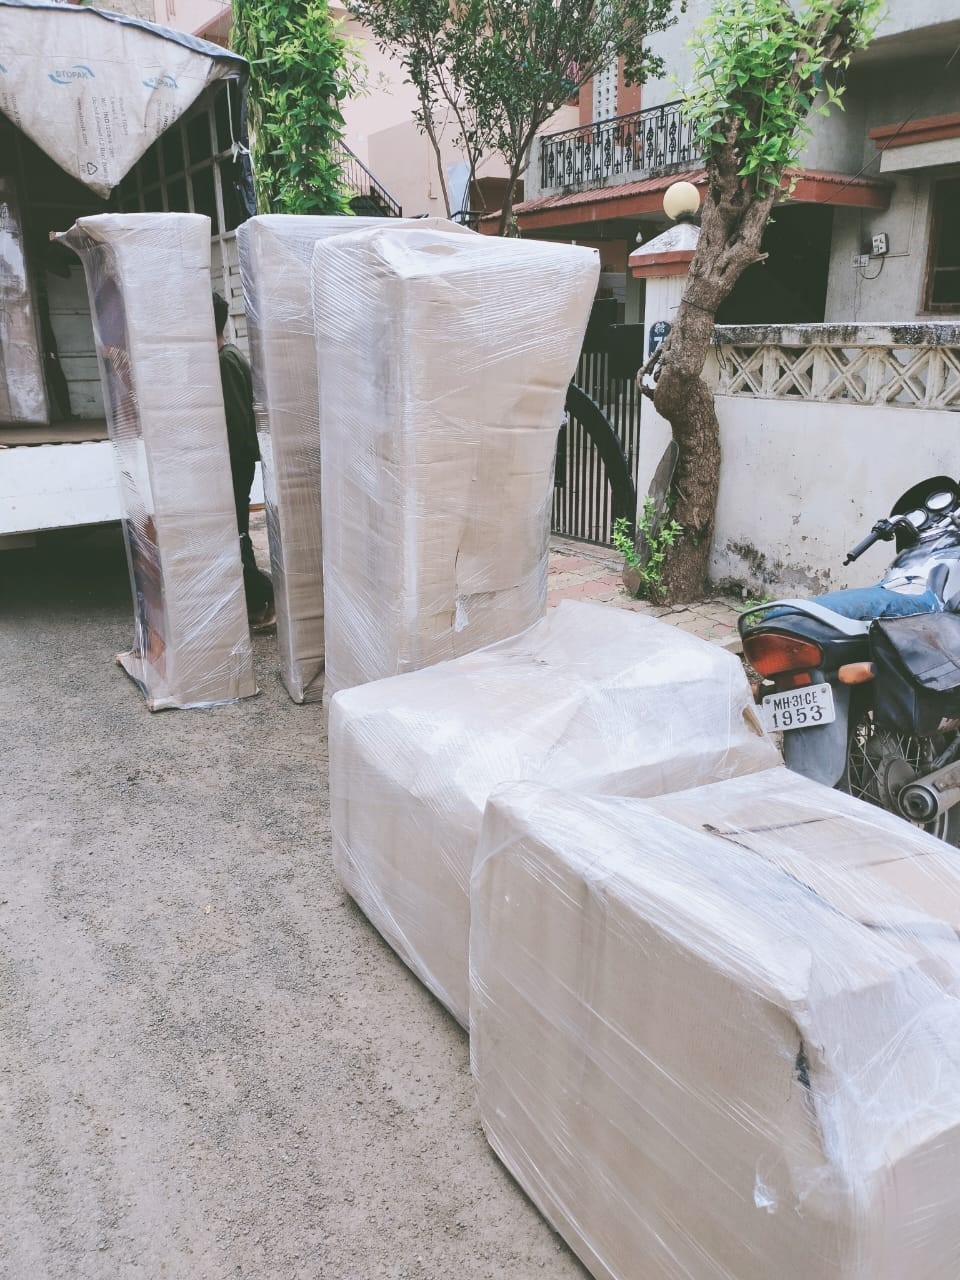 Rehousing packers and movers  transportation services image in Goa office